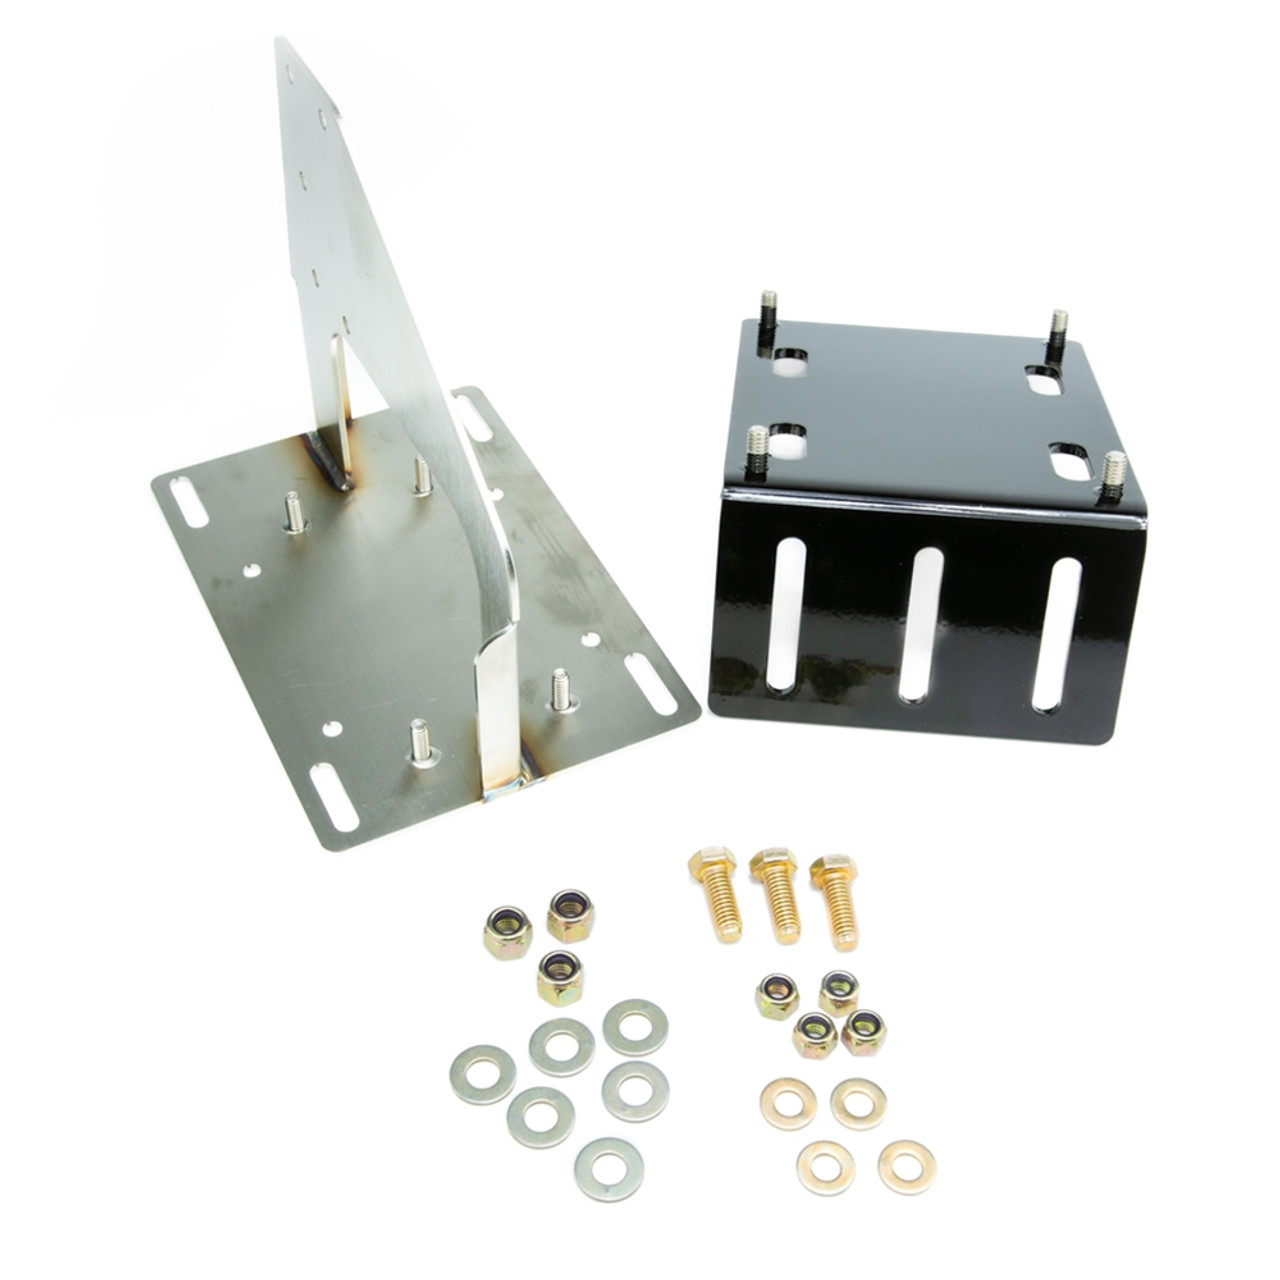 Driven Diesel OBS High Volume Fuel Delivery Kit (DUAL BOSCH : SUMP) for 1994 to 1997 OBS Ford 7.3L Powerstroke (DD-OBS-HVFDK-2P-SUMP-V3) Brackets/Caps View